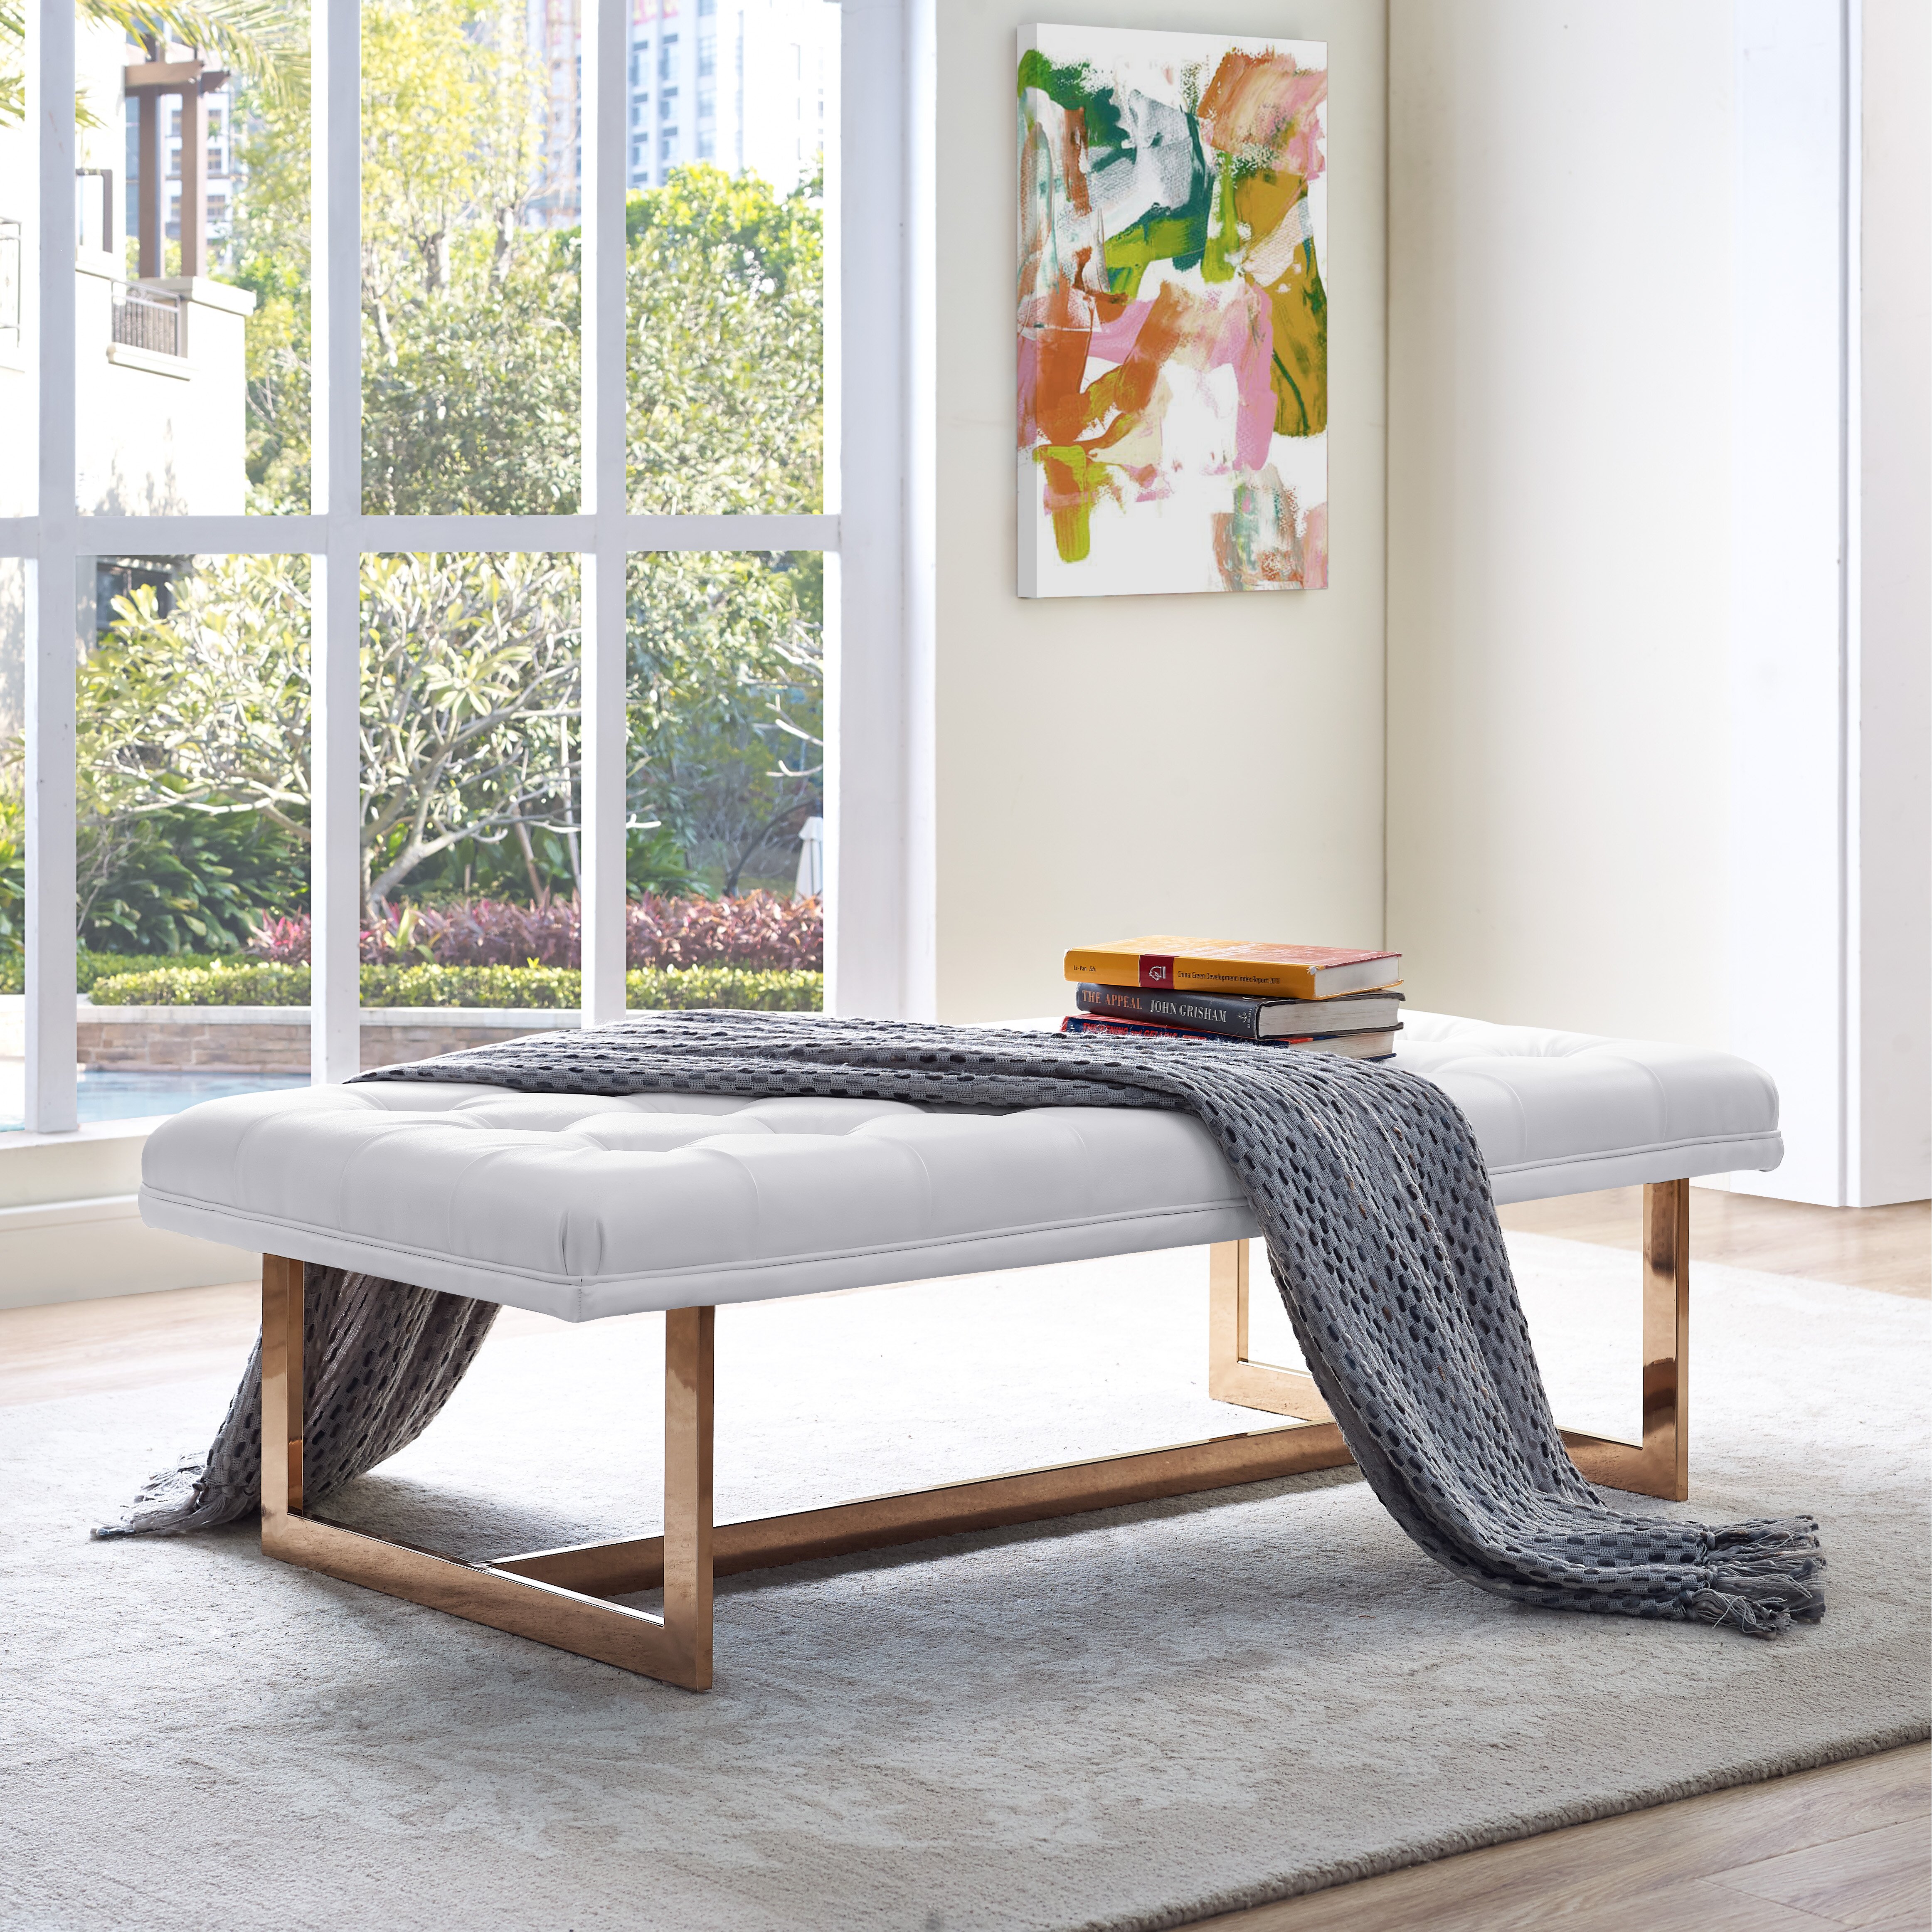 The Comfort And Versatility Of A Bedroom Upholstered Bench